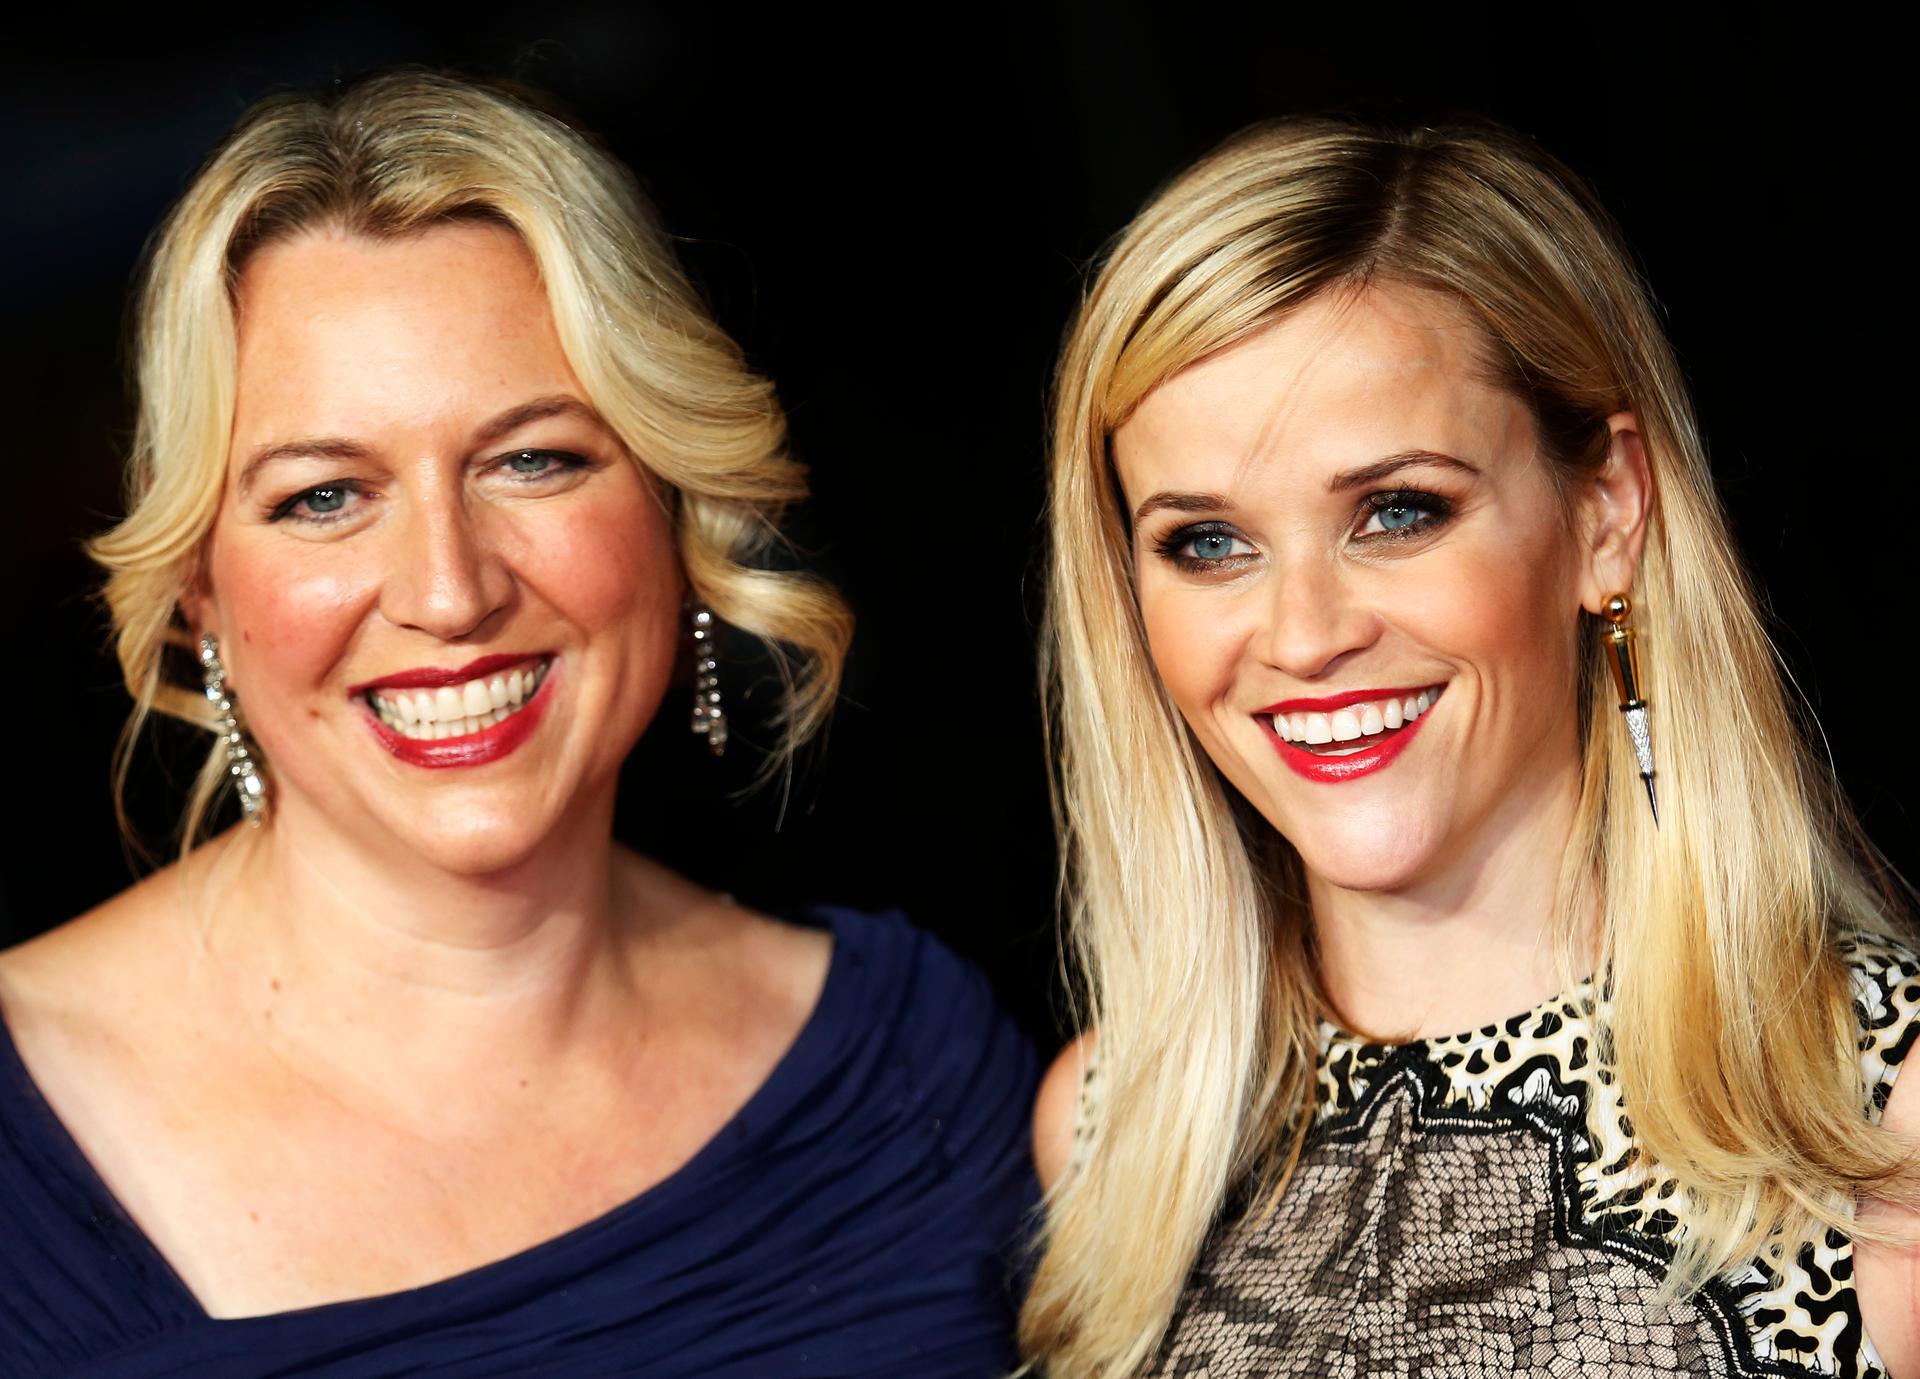 'Wild' author Cheryl Strayed, pictured with Reese Witherspoon, who has been nominated for an Oscar for her portrayal of Strayed, who trekked for 1,100 to try to put substance abuse and her mother's death behind her.